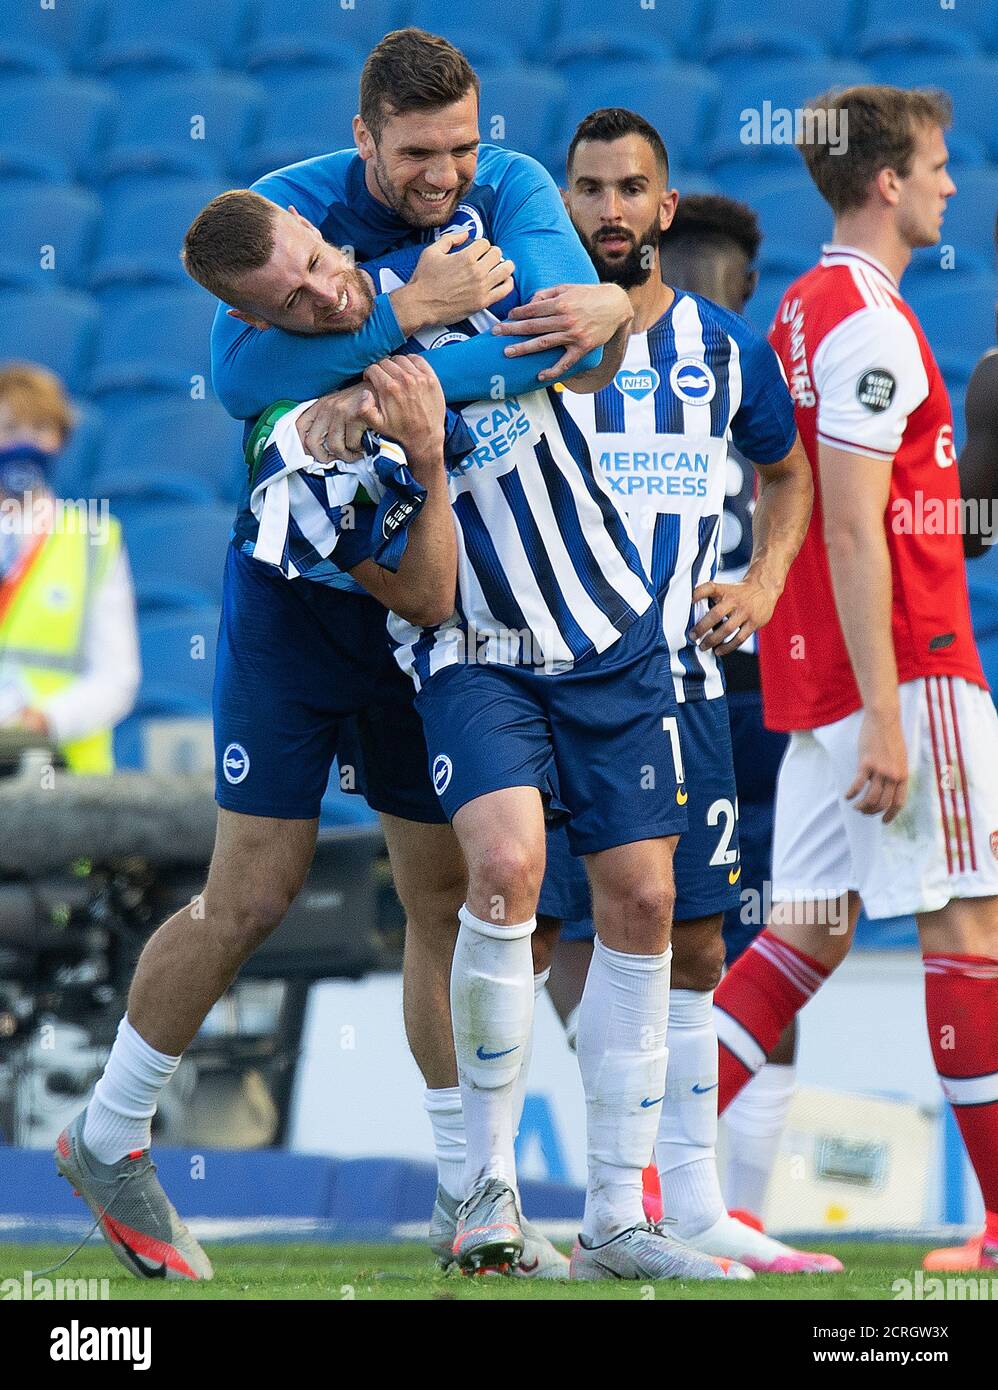 Brighton players celebrate victory at the final whistle during the Premier League match at the AMEX Stadium, Brighton.   PHOTO CREDIT : © MARK PAIN / Stock Photo